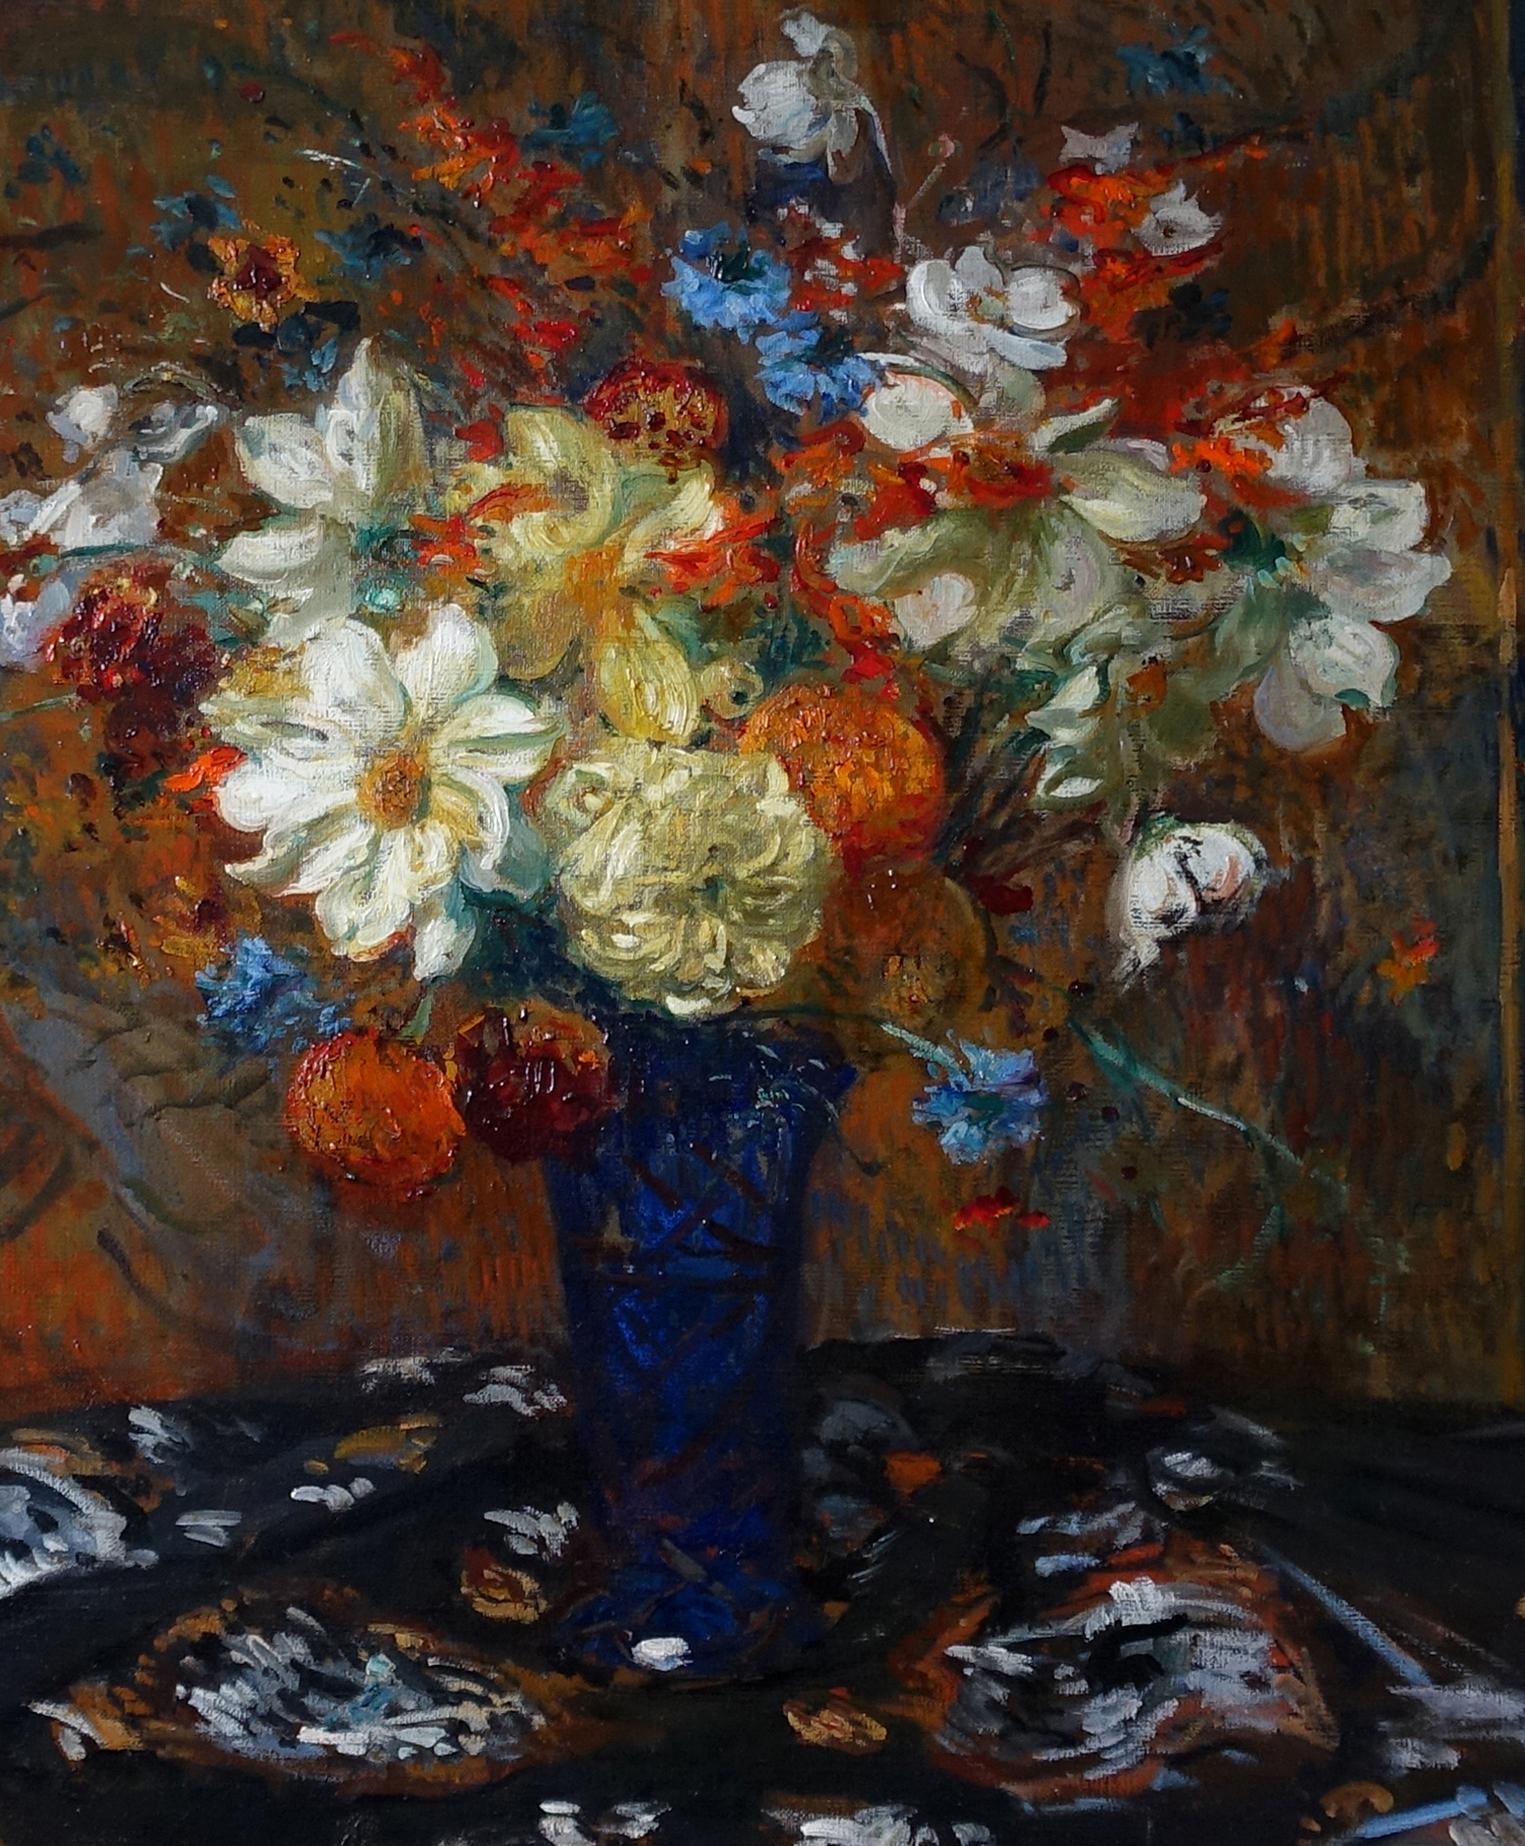 A beautiful floral oil painting by the French Impressionist artist Jacques-Emile Blanche. This stunning Impressionist painting, painted circa 1900 depicts a vast floral bouquet of white dahlias, blue cornflowers and orange crocosmia. The